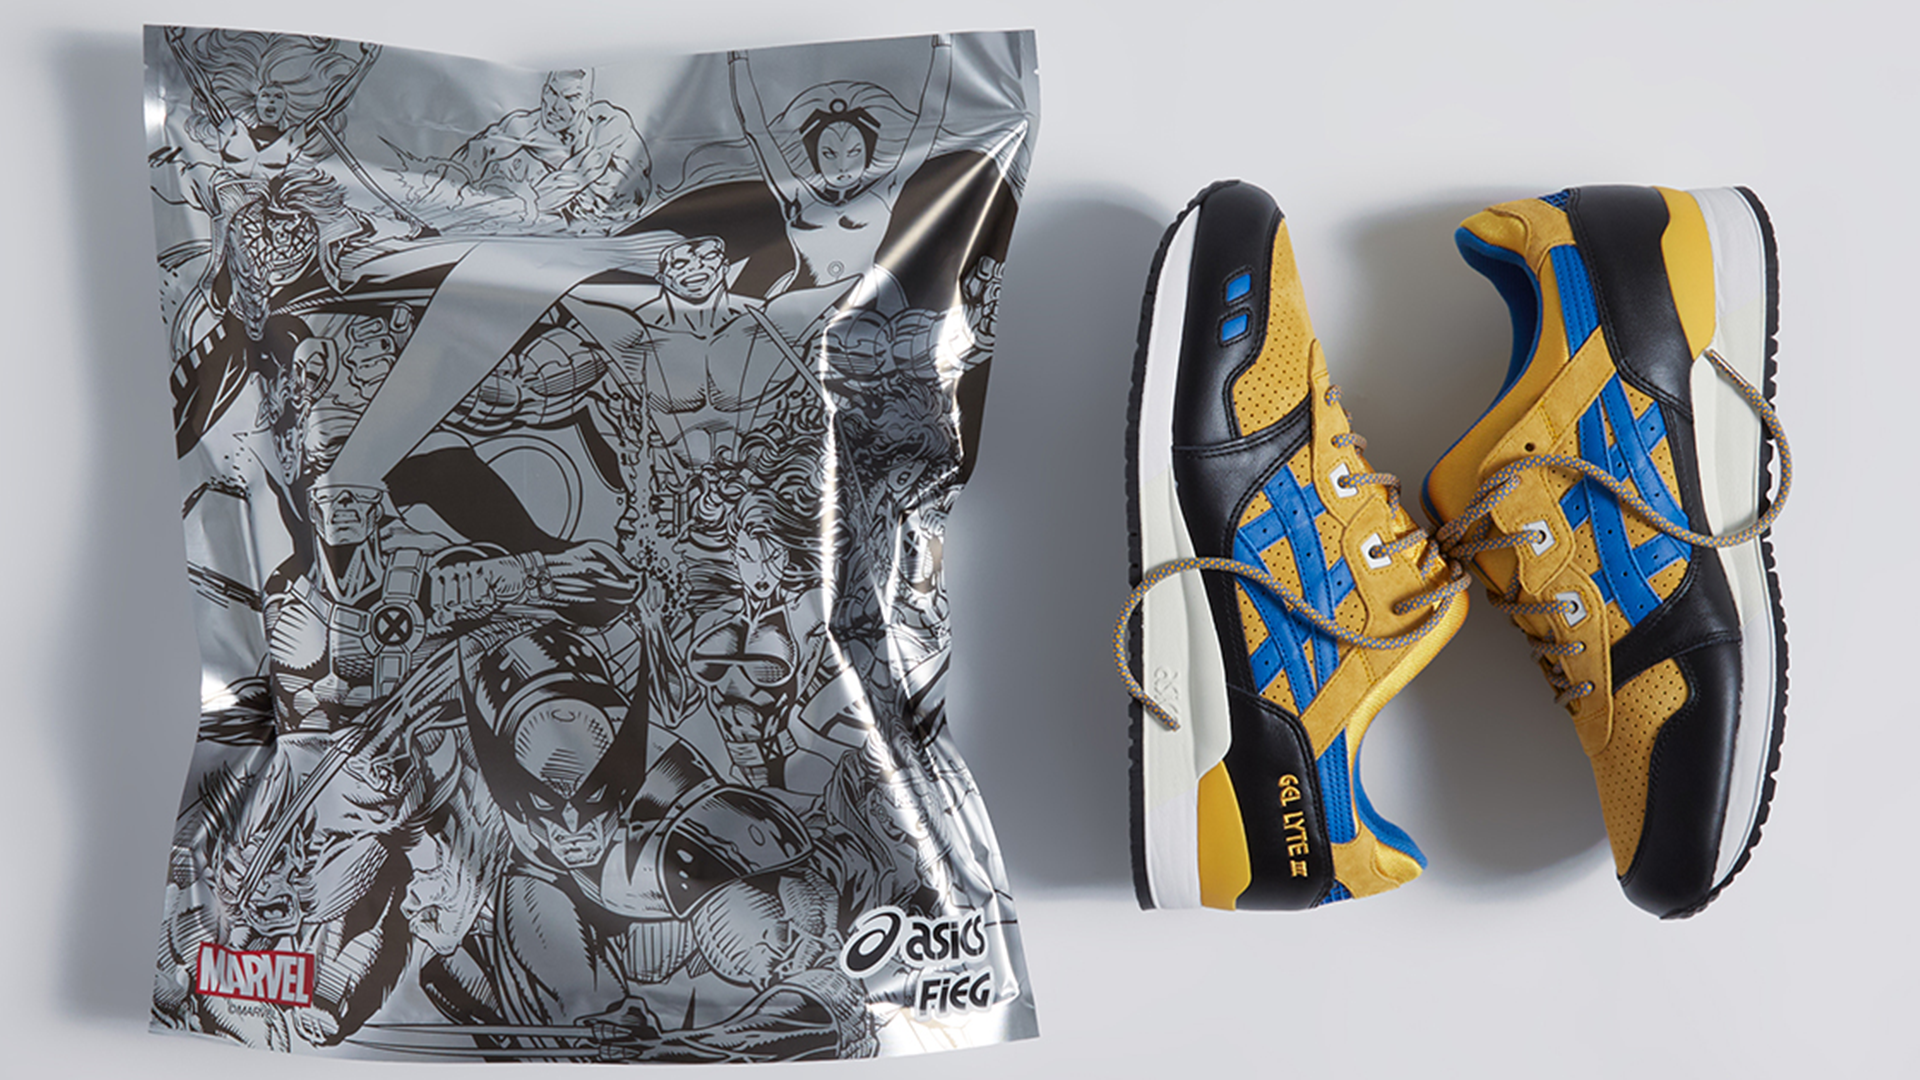 KITH's ASICS x X-Men Collab Takes Inspo From Collectable Trading